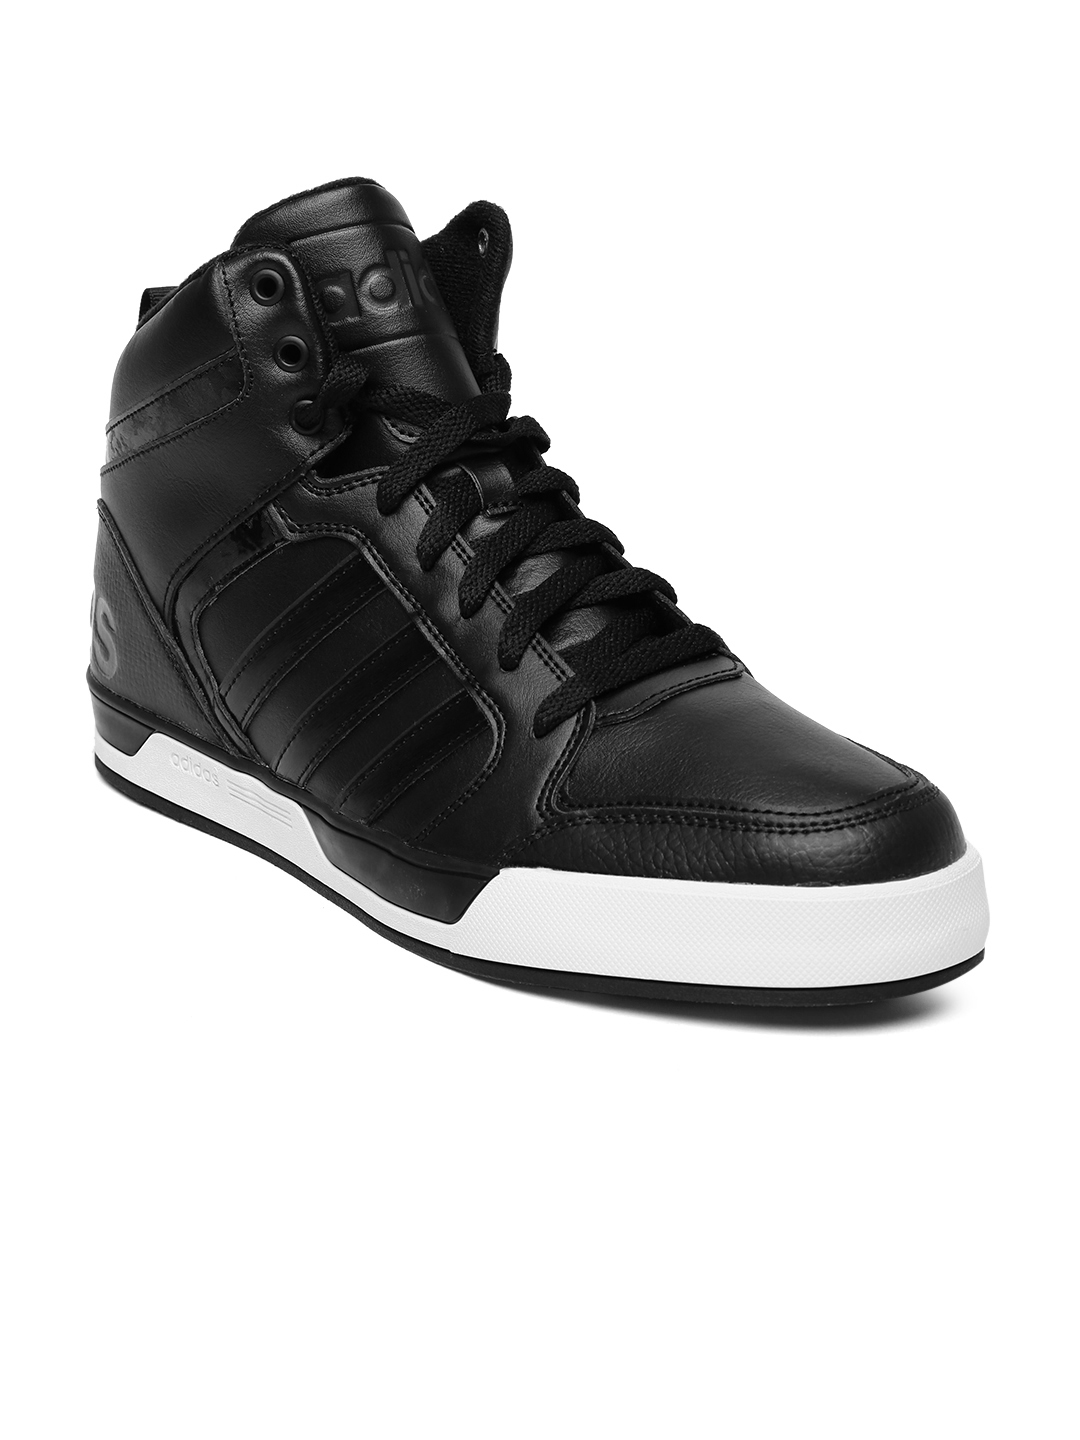 NEO Men Black Sneakers - Casual Shoes for Men 1461347 | Myntra